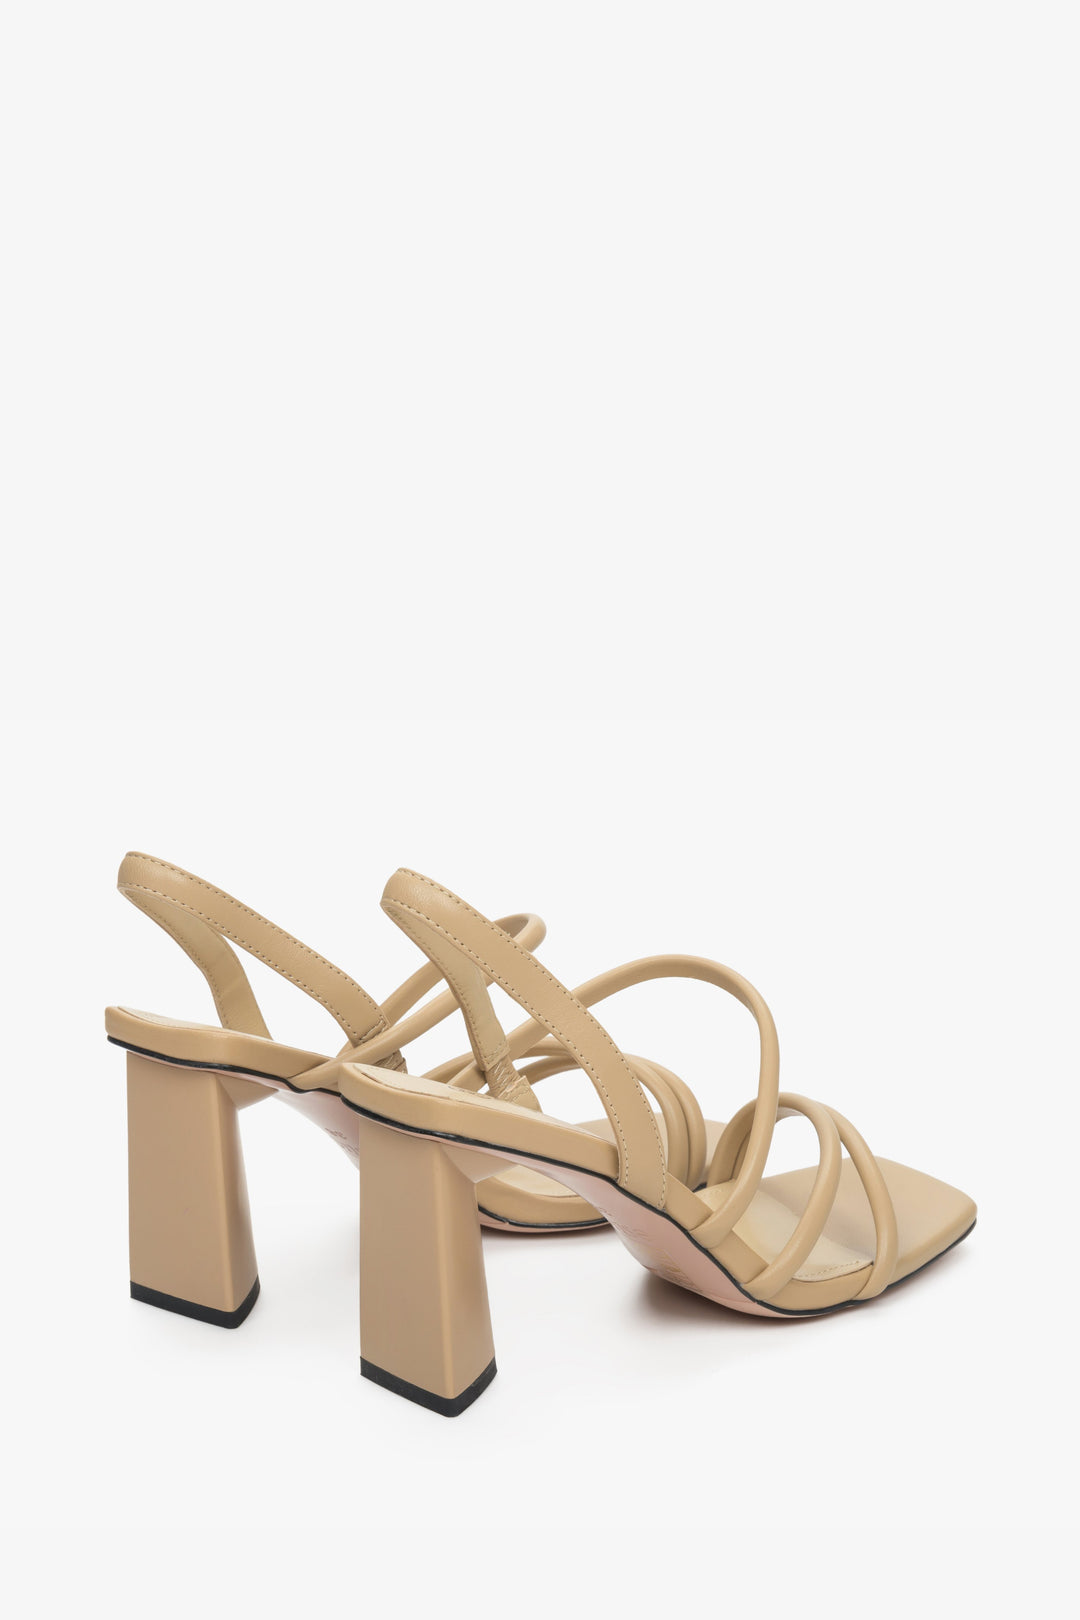 Sand beige strappy women's leather sandals on a block heel - a close-up on the bottom line.